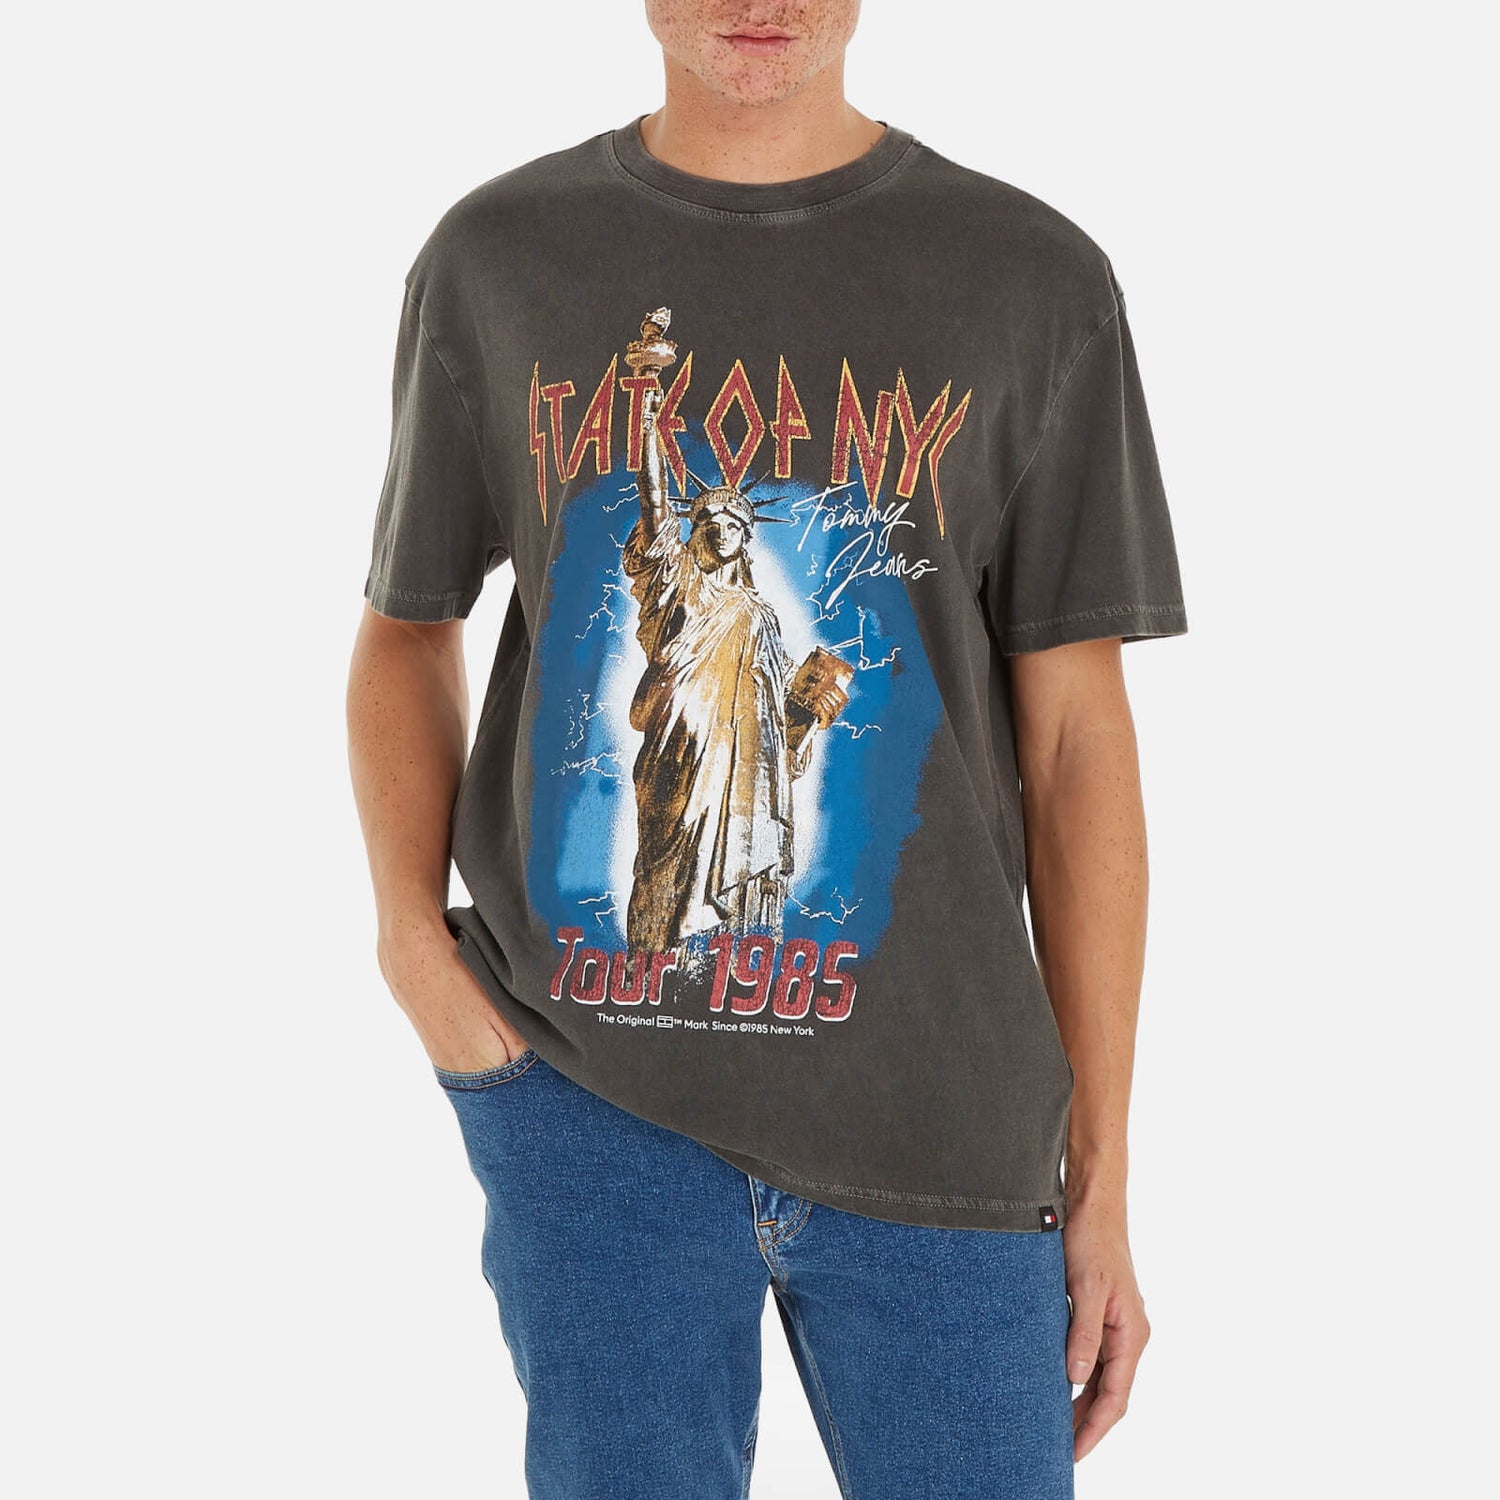 Tommy Jeans State Of NYC Graphic Cotton T-Shirt - M